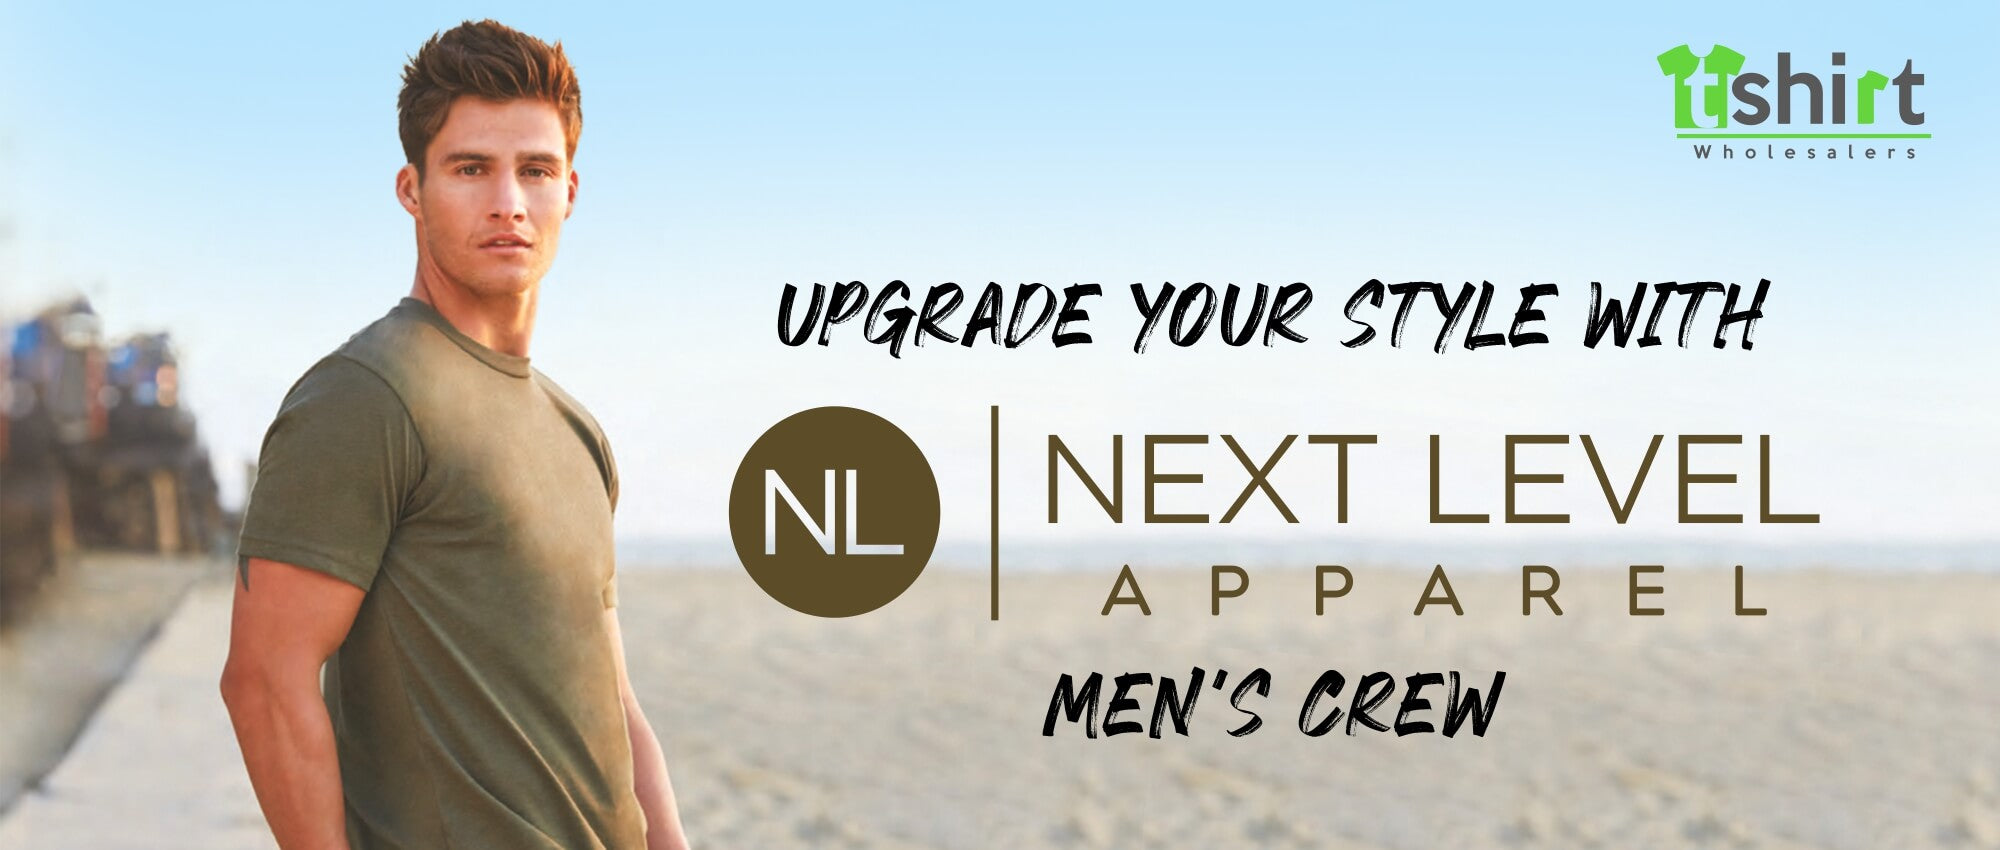 UPGRADE YOUR STYLE WITH NEXT-LEVEL APPAREL MEN'S CREW